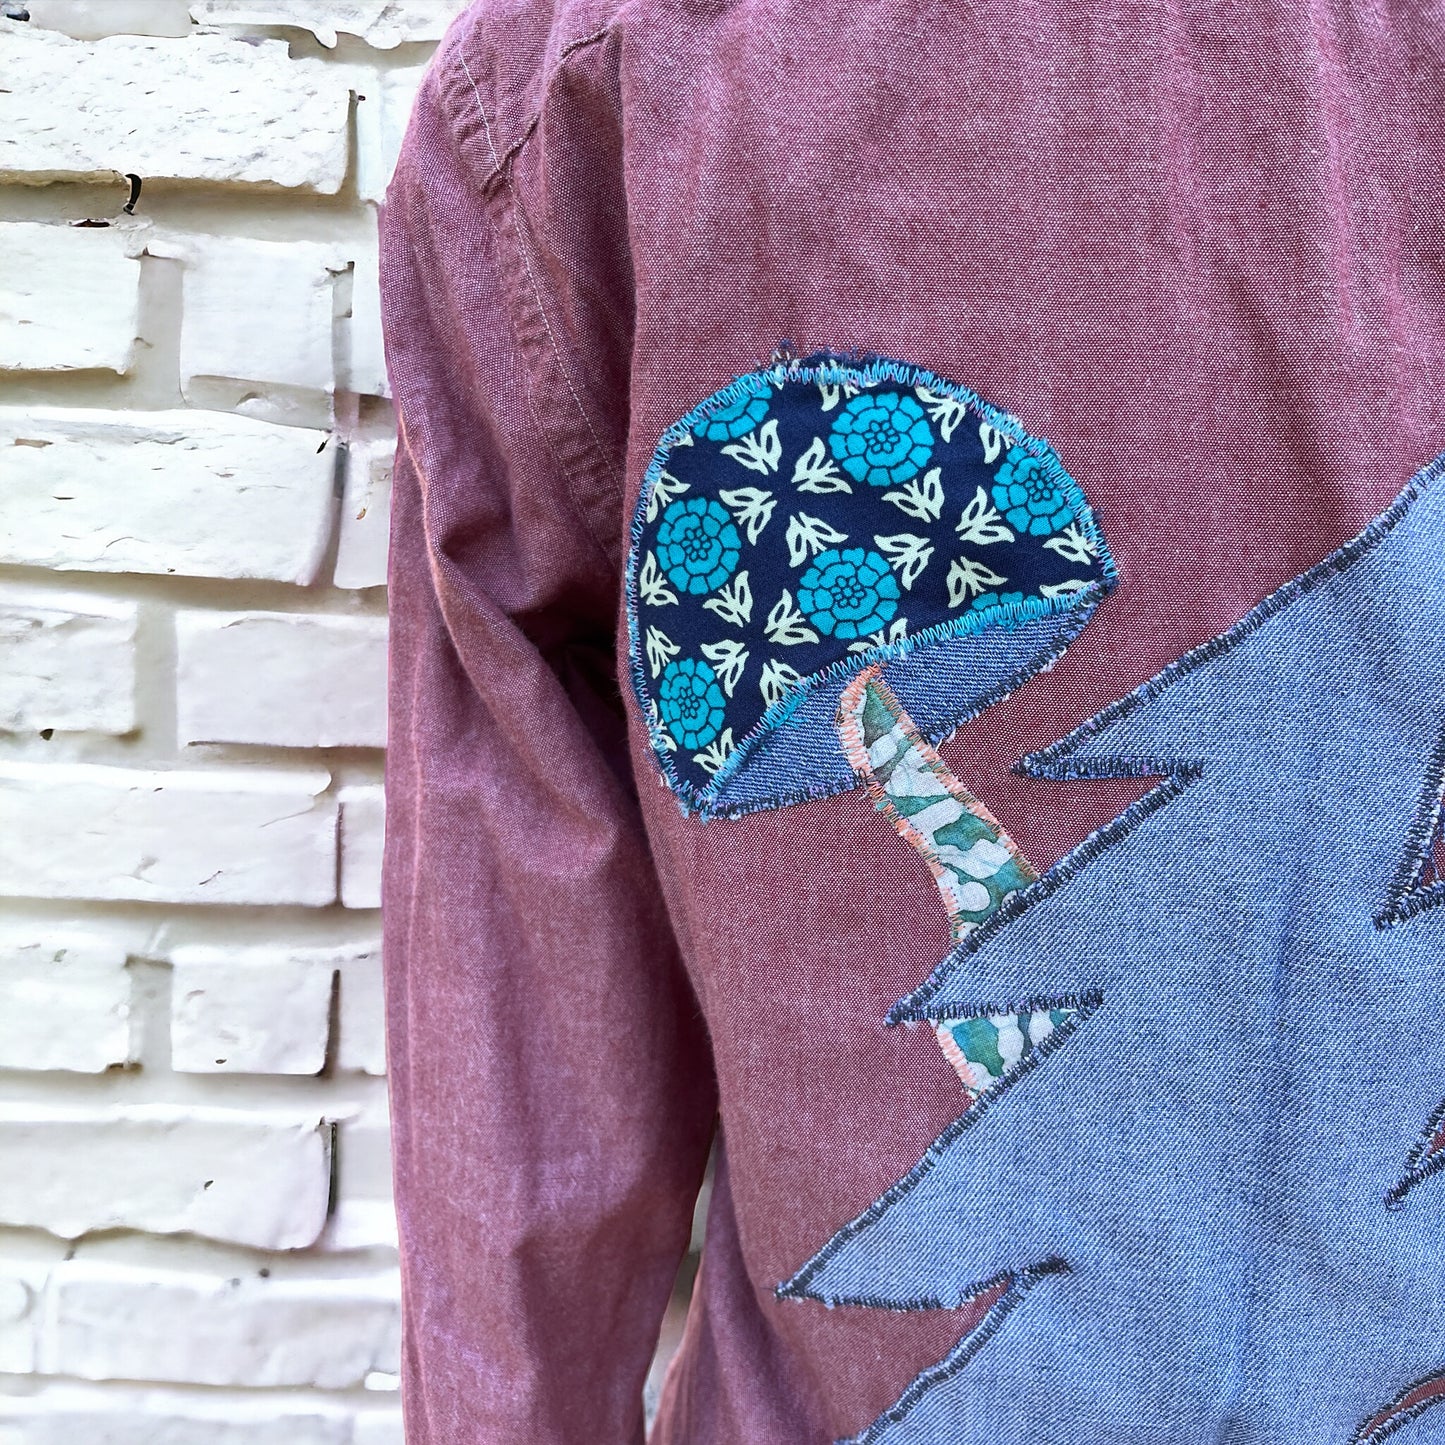 Grateful Dead Inspired Upcycled Button Up